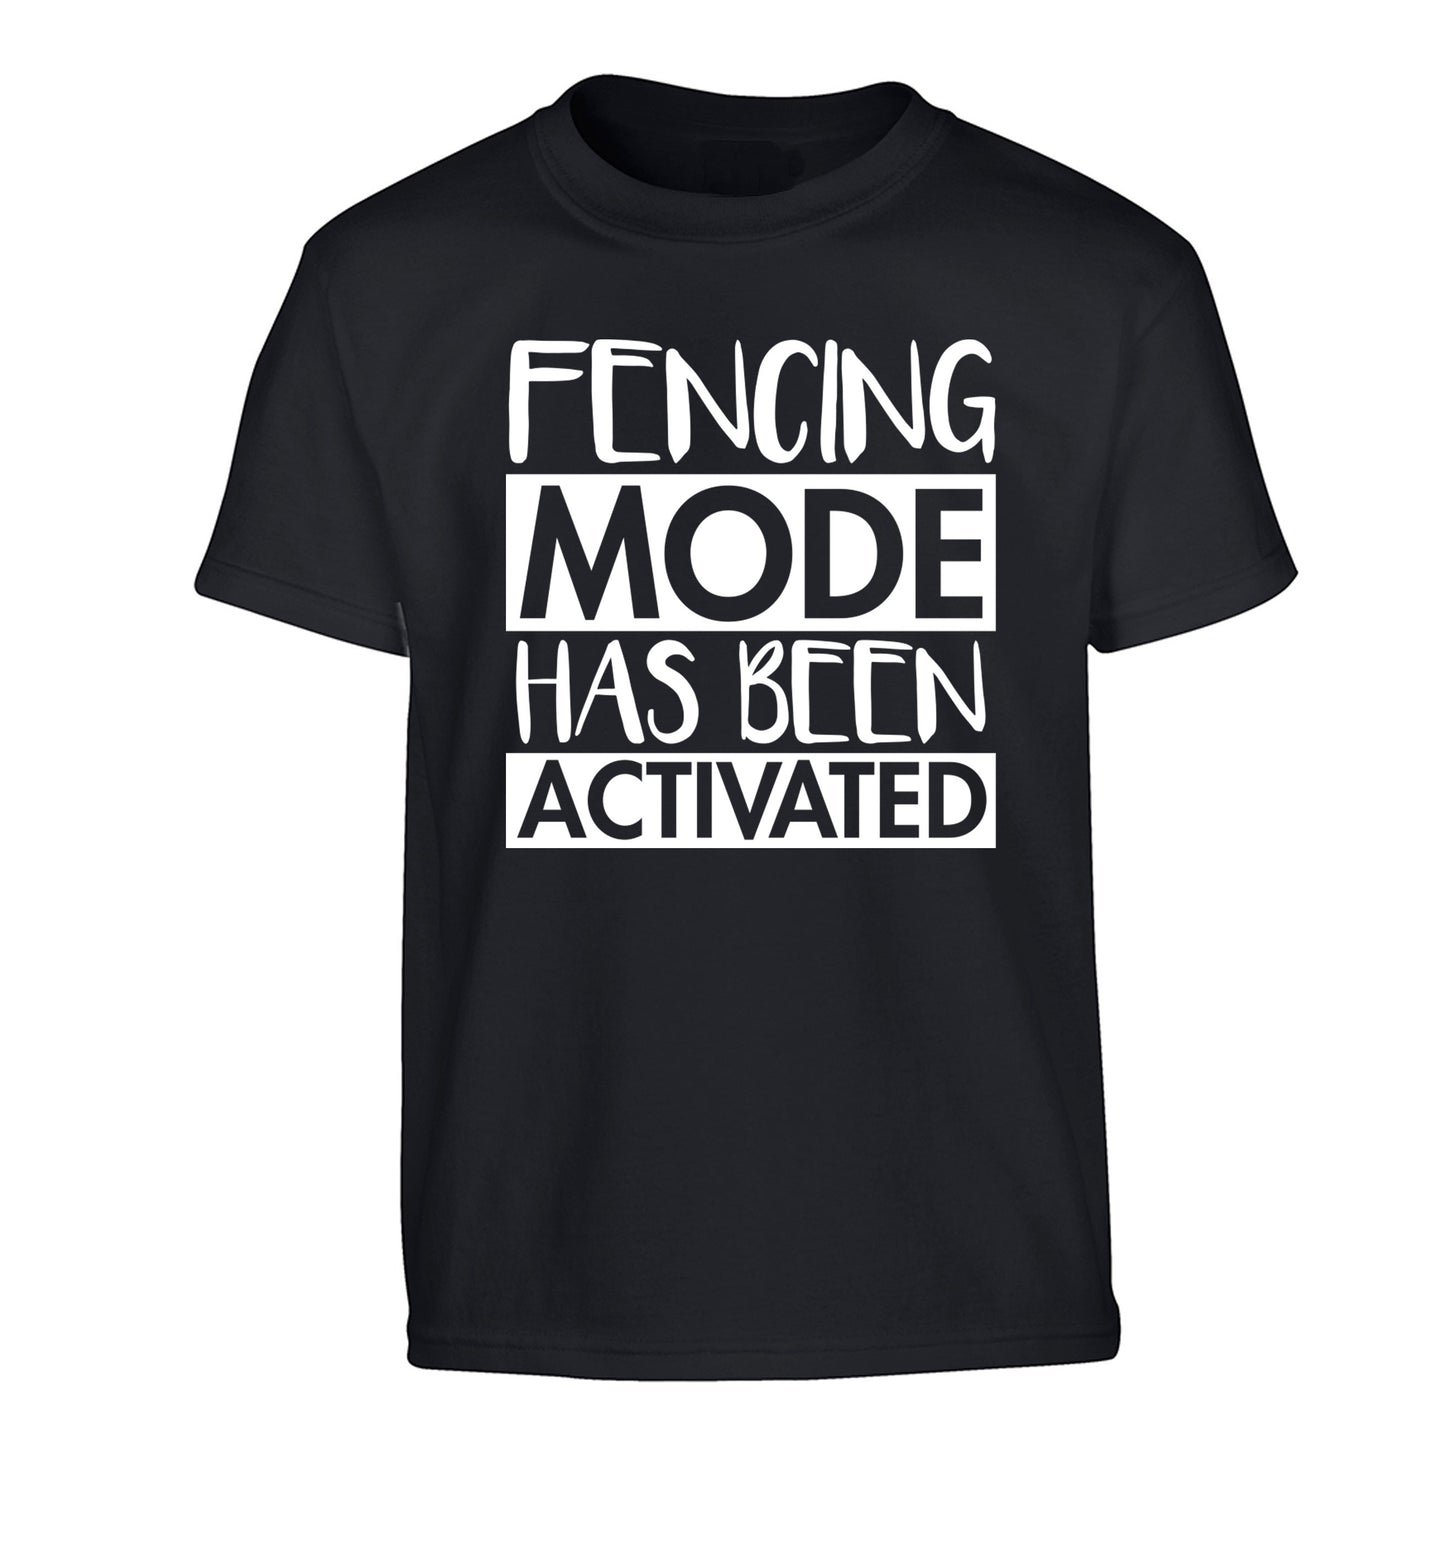 Fencing mode activated Children's black Tshirt 12-14 Years